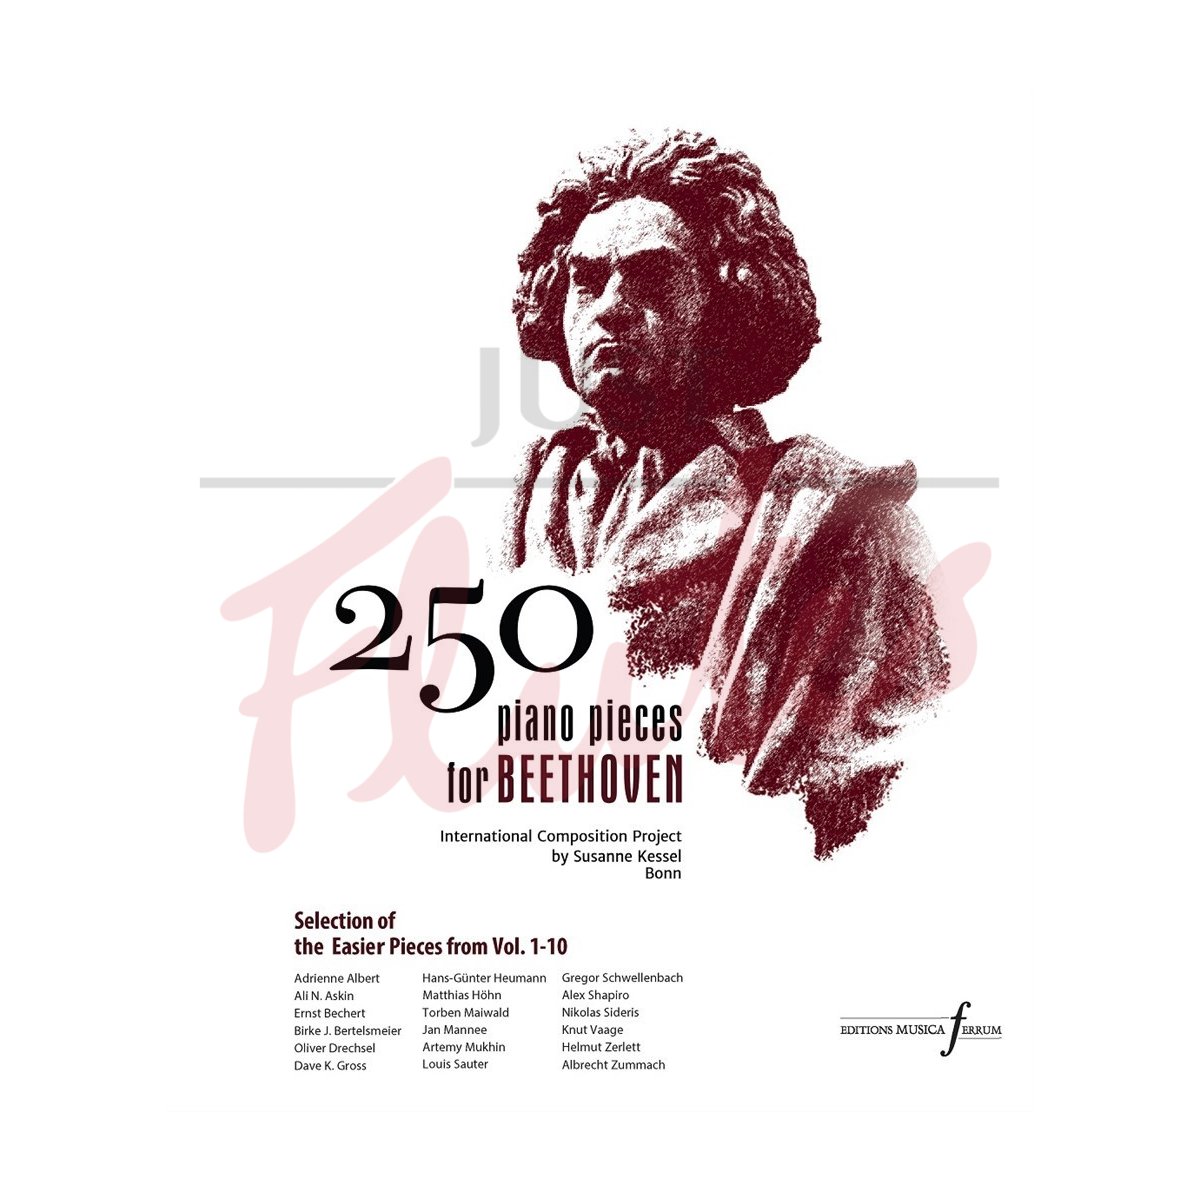 250 Piano Pieces for Beethoven: Selection of the Easier Pieces from Vol.1-10